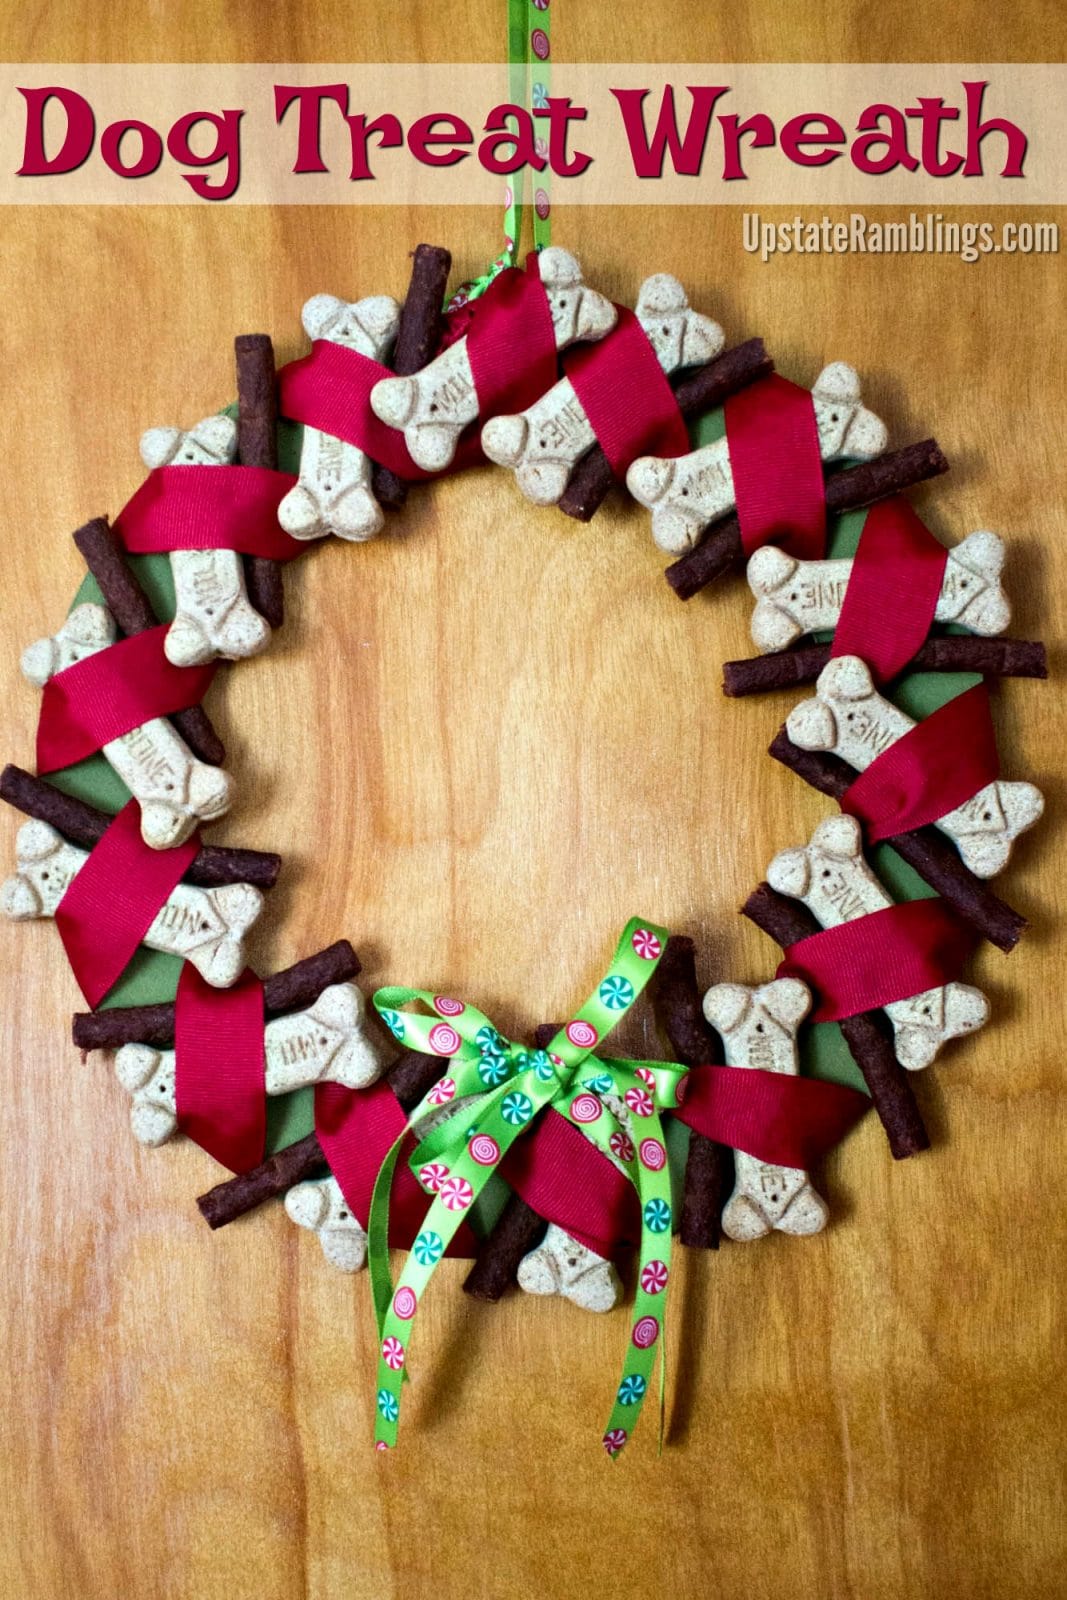 Don't forget your furry friends - celebrate them with a Dog Treat Wreath! This easy to make wreath will have your favorite dog jumping for joy during the holiday season. This makes a perfect holiday decoration - and a great present for your favorite doggie #christmas #dogs #petlover #dogdiy #christmasdecorations